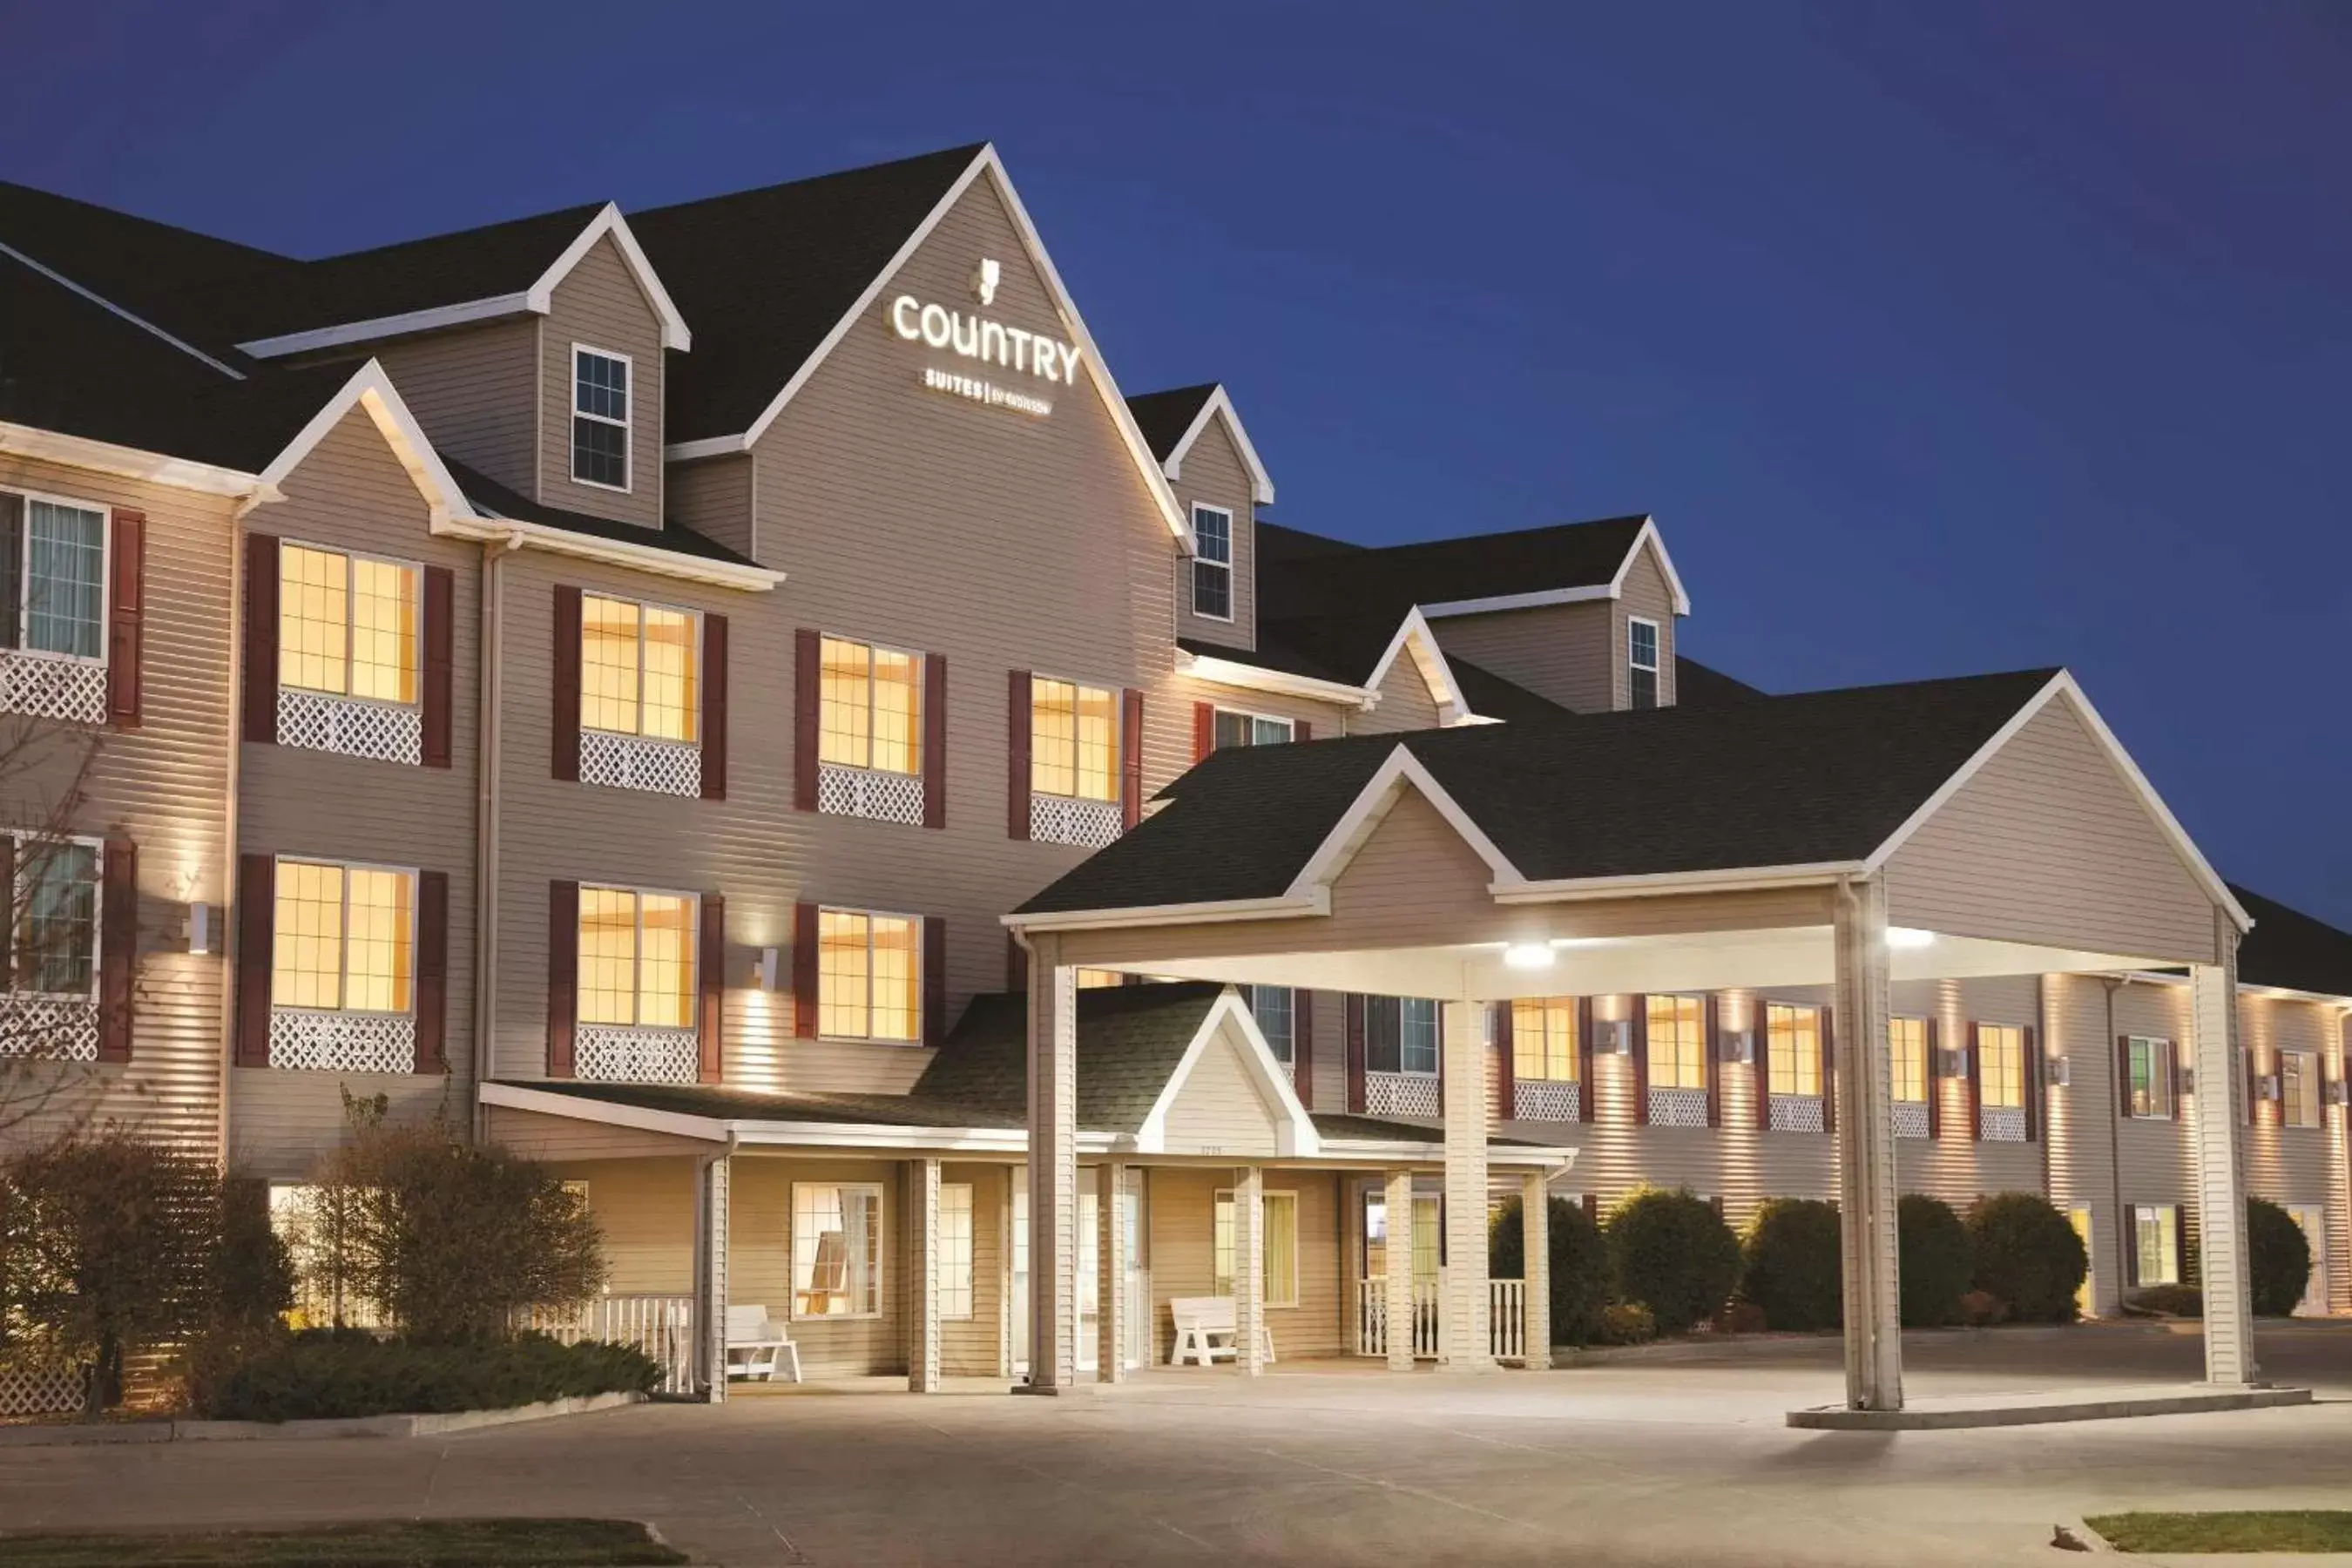 Property Building in Country Inn & Suites by Radisson, Bismarck, ND